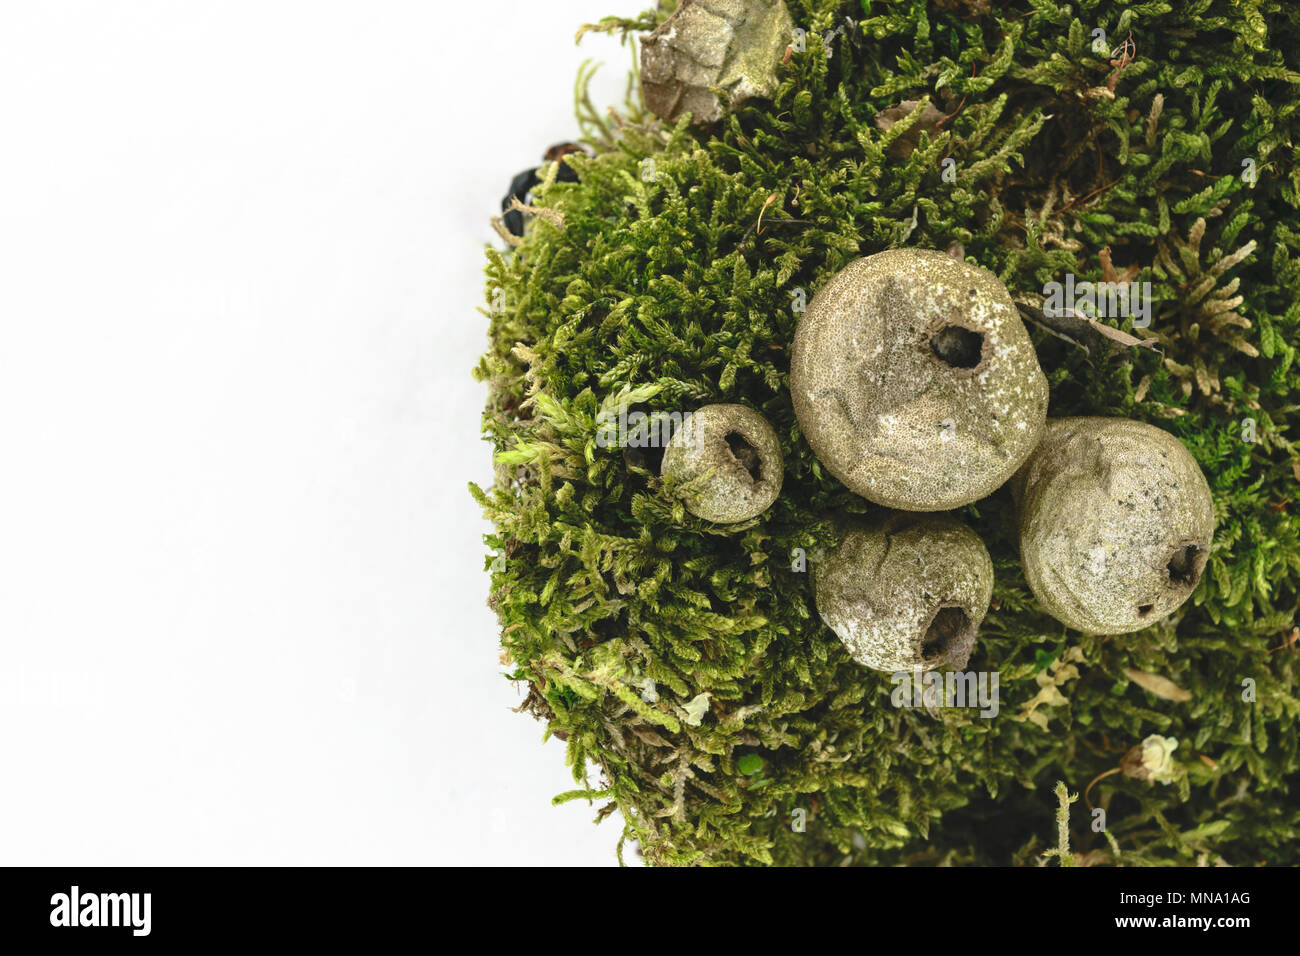 Puffball fungus mushrooms on green moss background isolated on white background surface Stock Photo